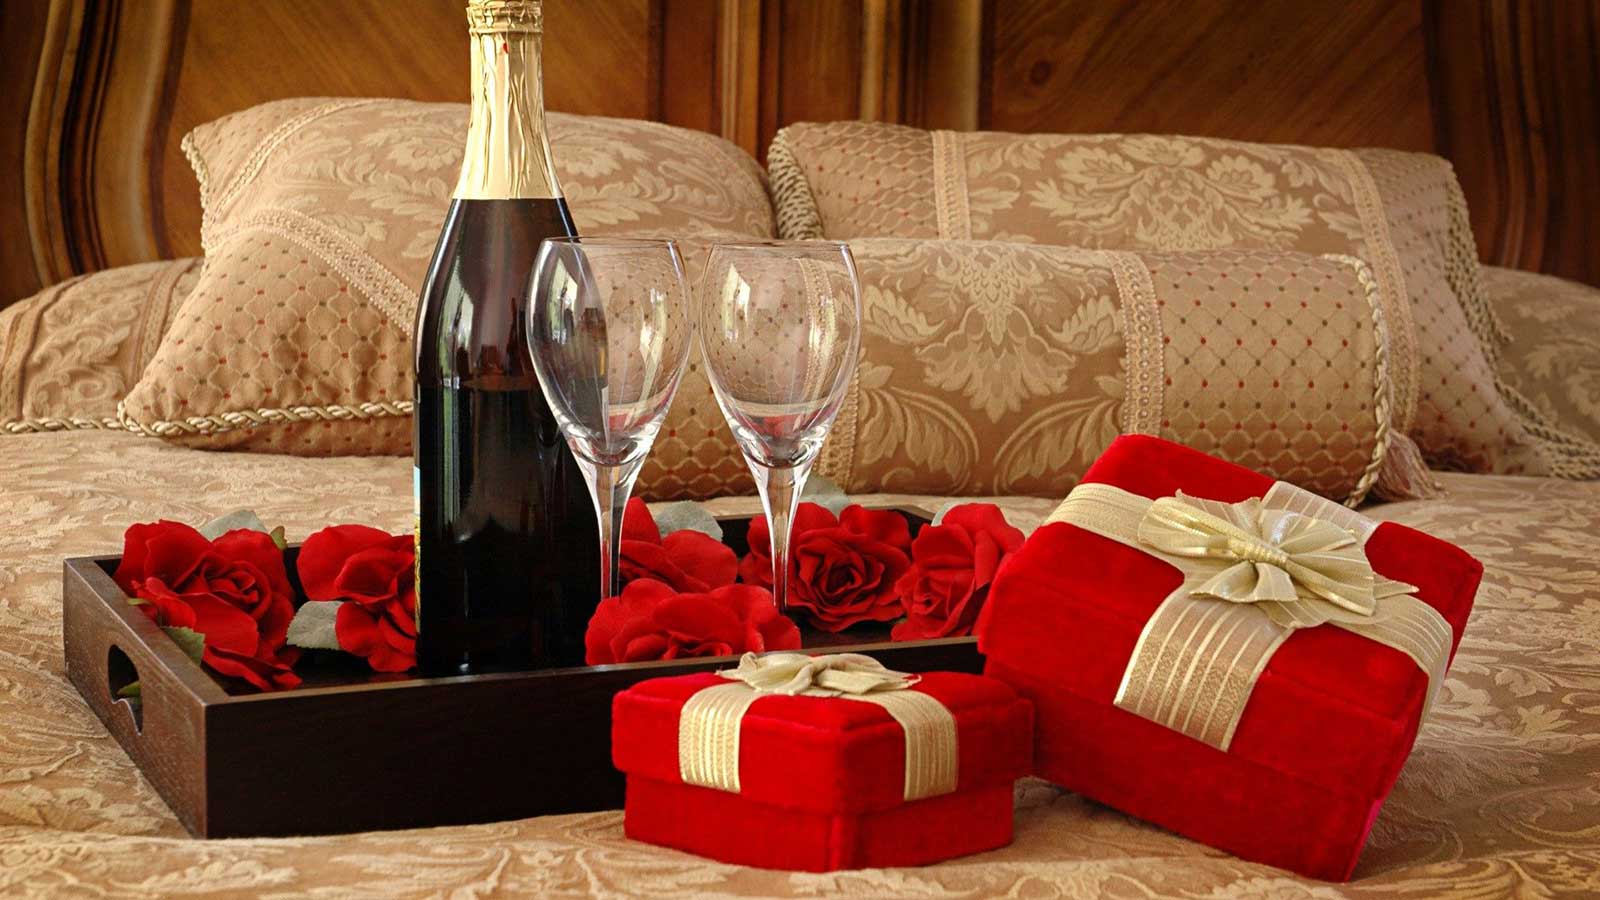 Romantic Gift for Her, Him - Wife Birthday Gifts India | Ubuy-hangkhonggiare.com.vn